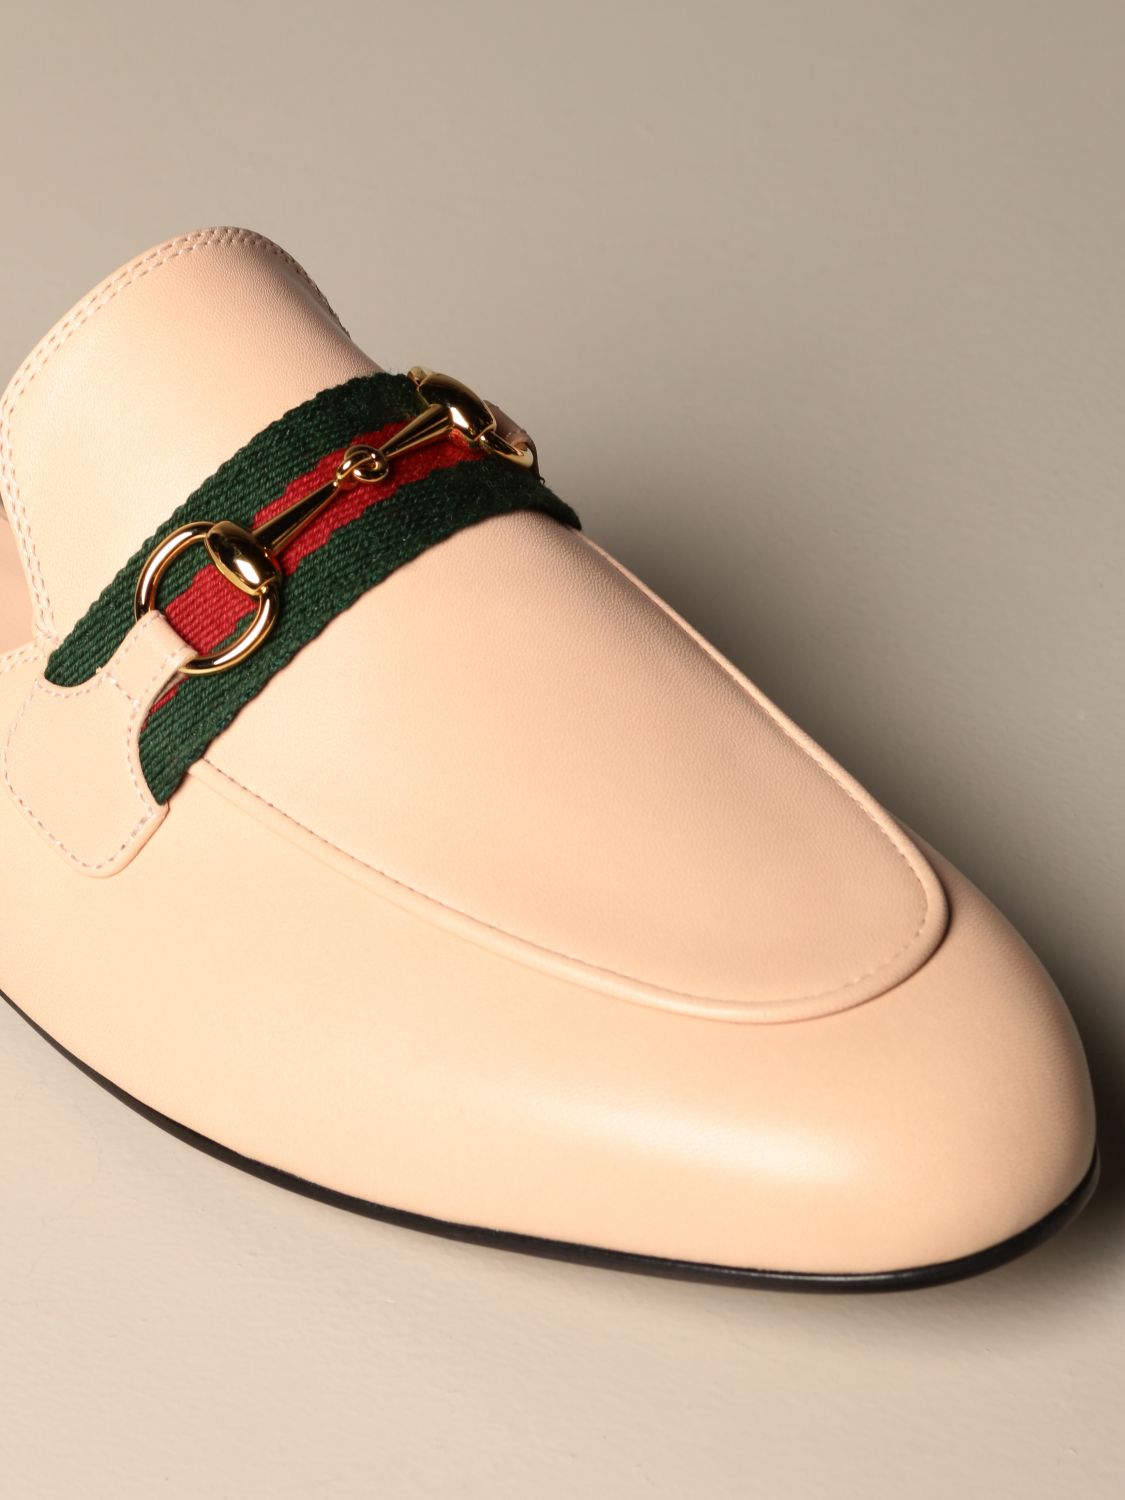 Gucci Princetown leather slipper with 